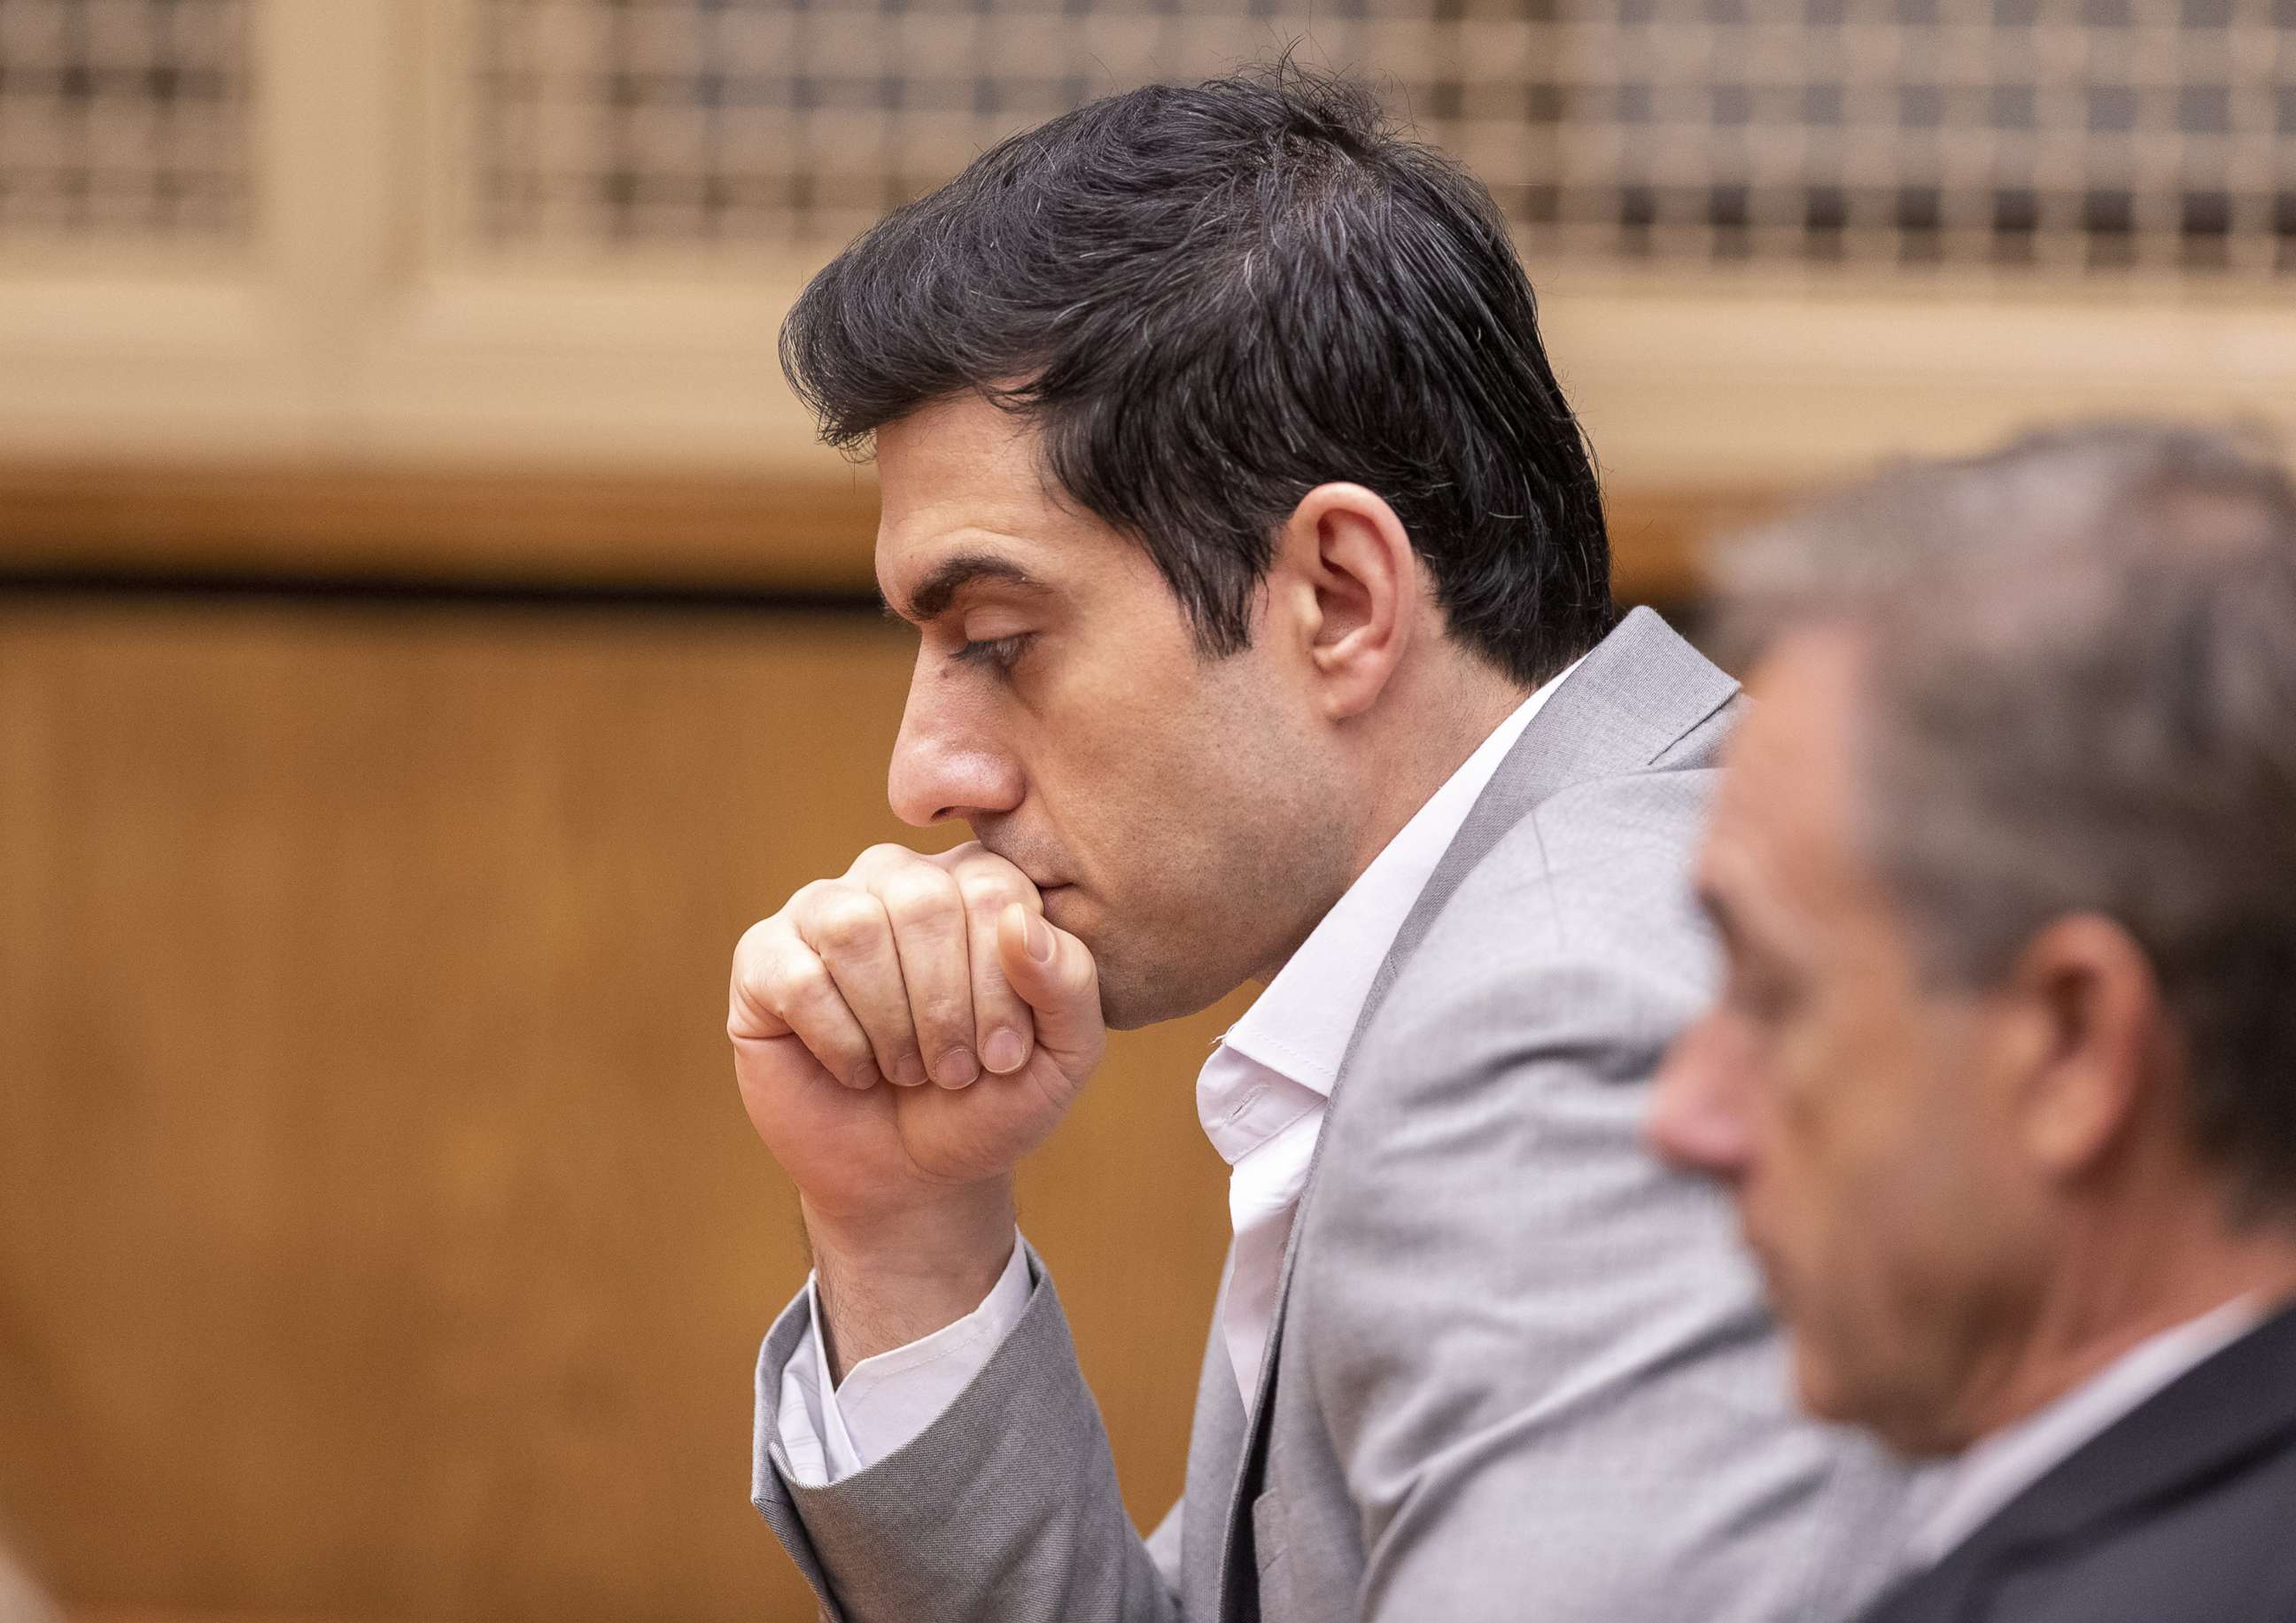 PHOTO: Defendant Hossein Nayeri listens to the judge's instructions before the reading of guilty verdicts during his trial in Newport Beach, CA., Aug. 16, 2019.